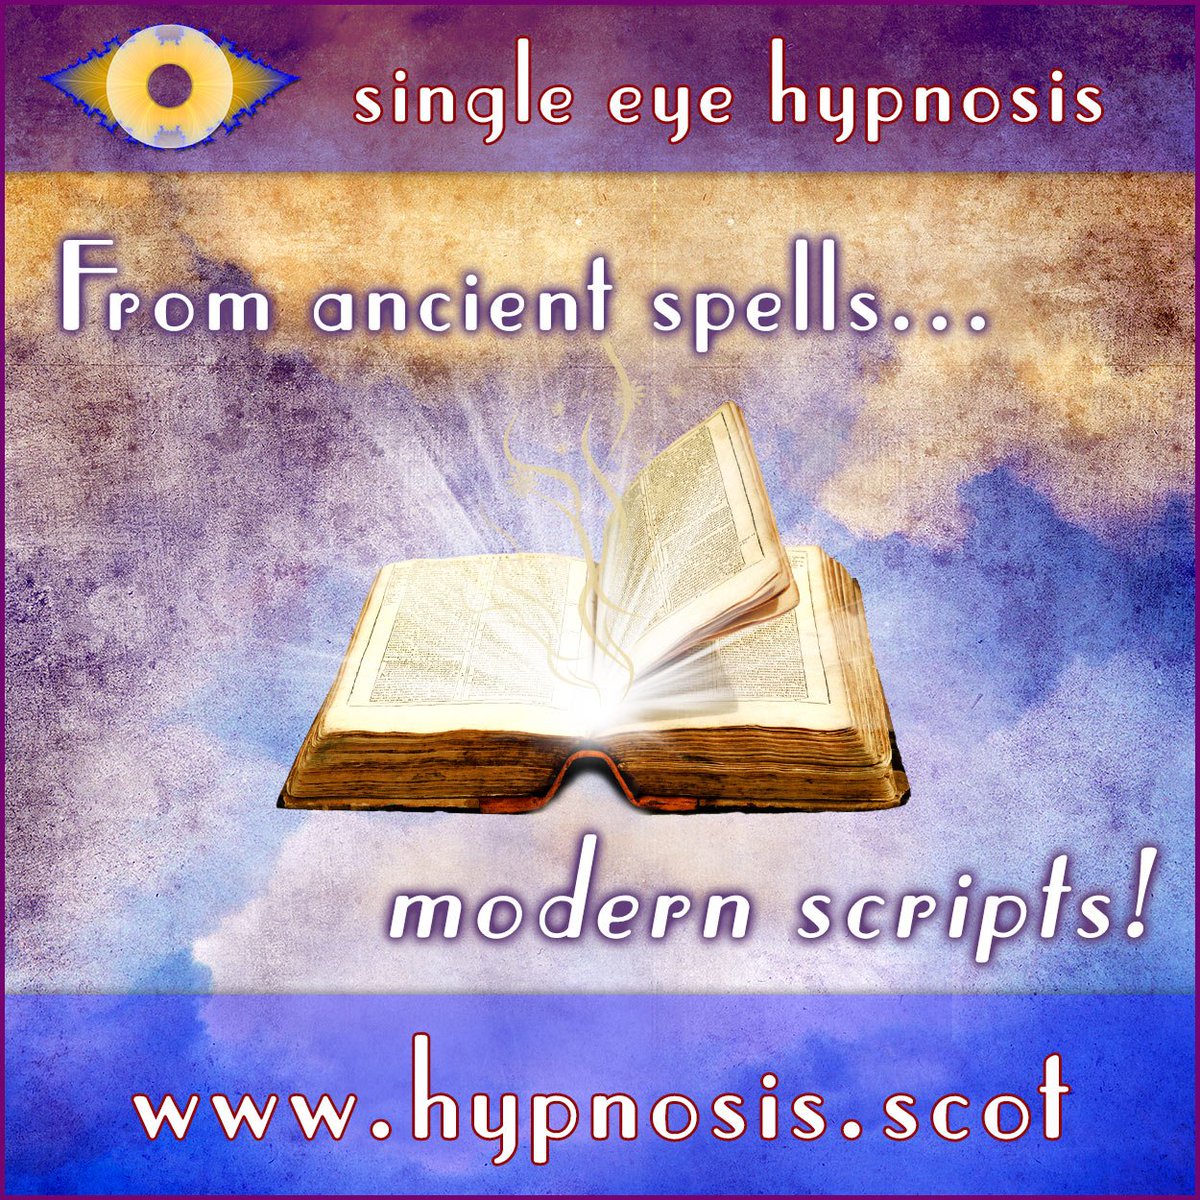 Original and imaginative hypnotherapy scripts now available for instant download etsy.com/uk/shop/single…
#tuesdaythoughts #tuesdaymotivation #singleeyehypnosis #etyuk #hypnotherapy #hypnosisscripts #modernhypnosis